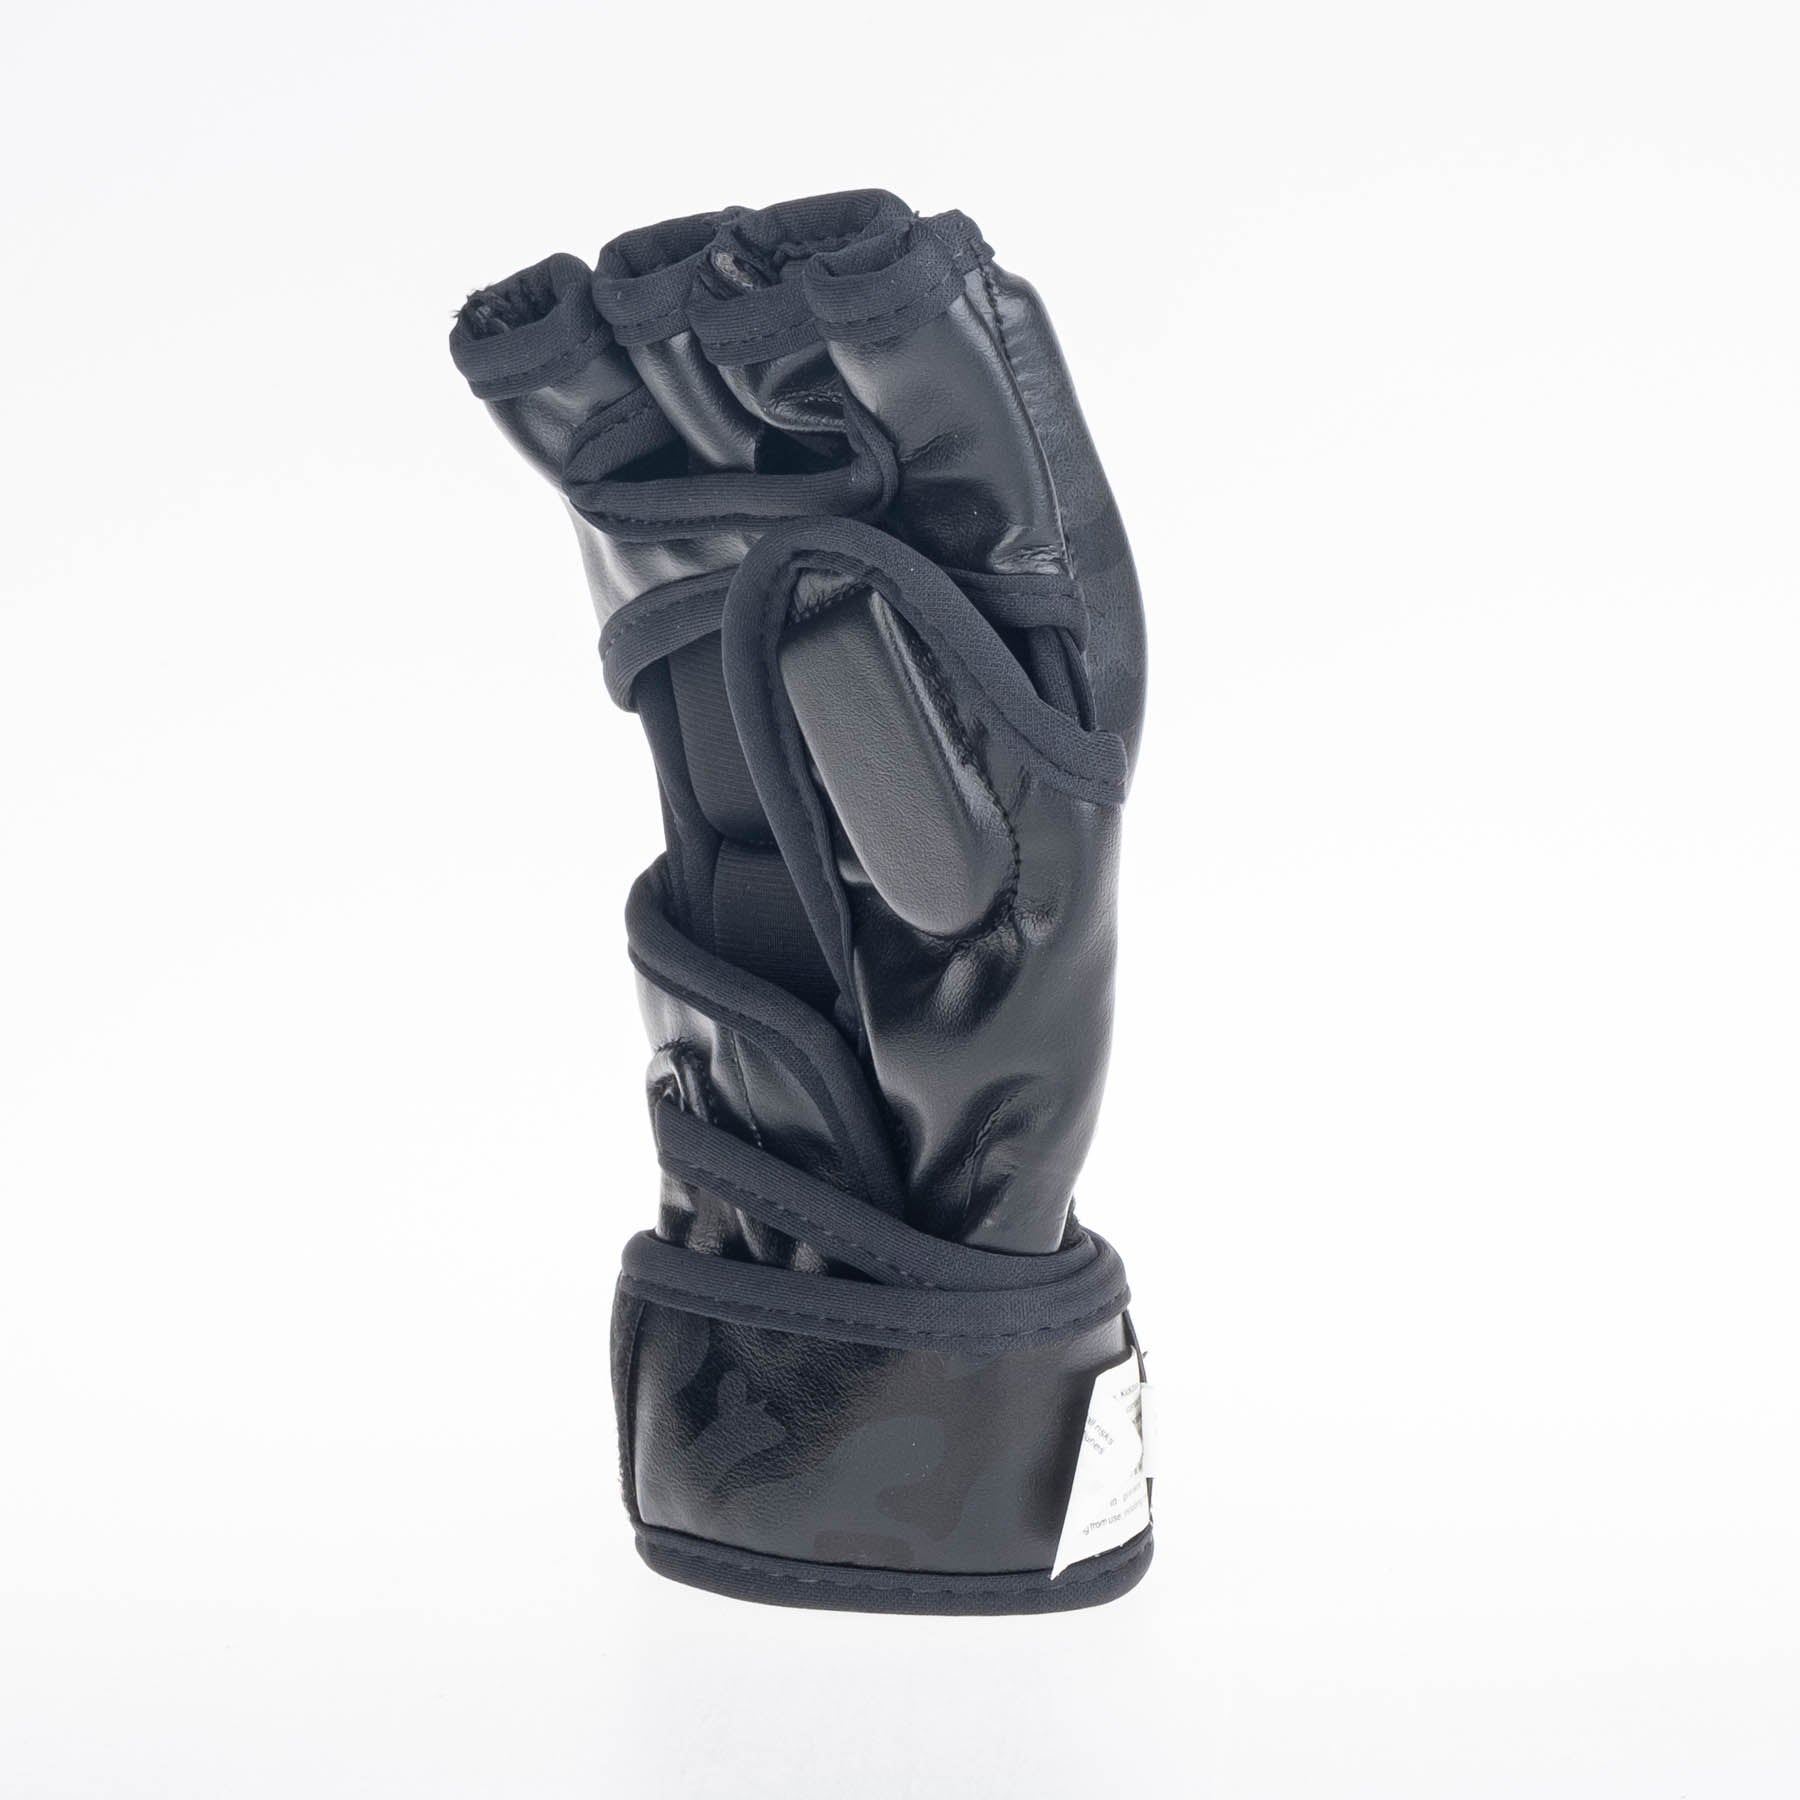 Fighter MMA Gloves Competition - black camo